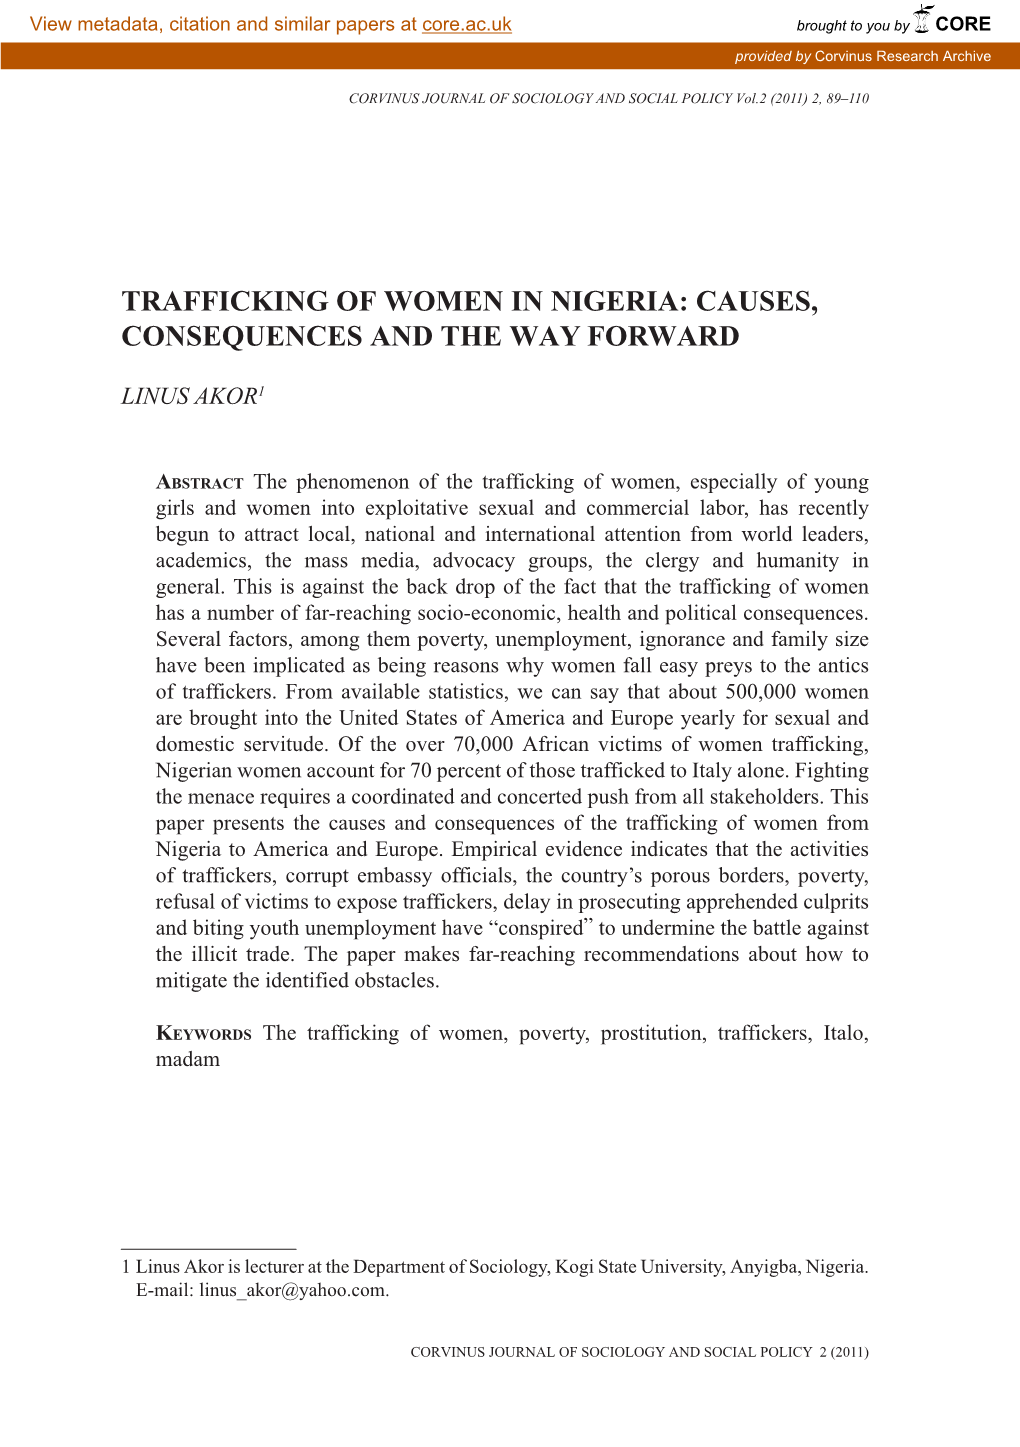 Trafficking of Women in Nigeria: Causes, Consequences and the Way Forward